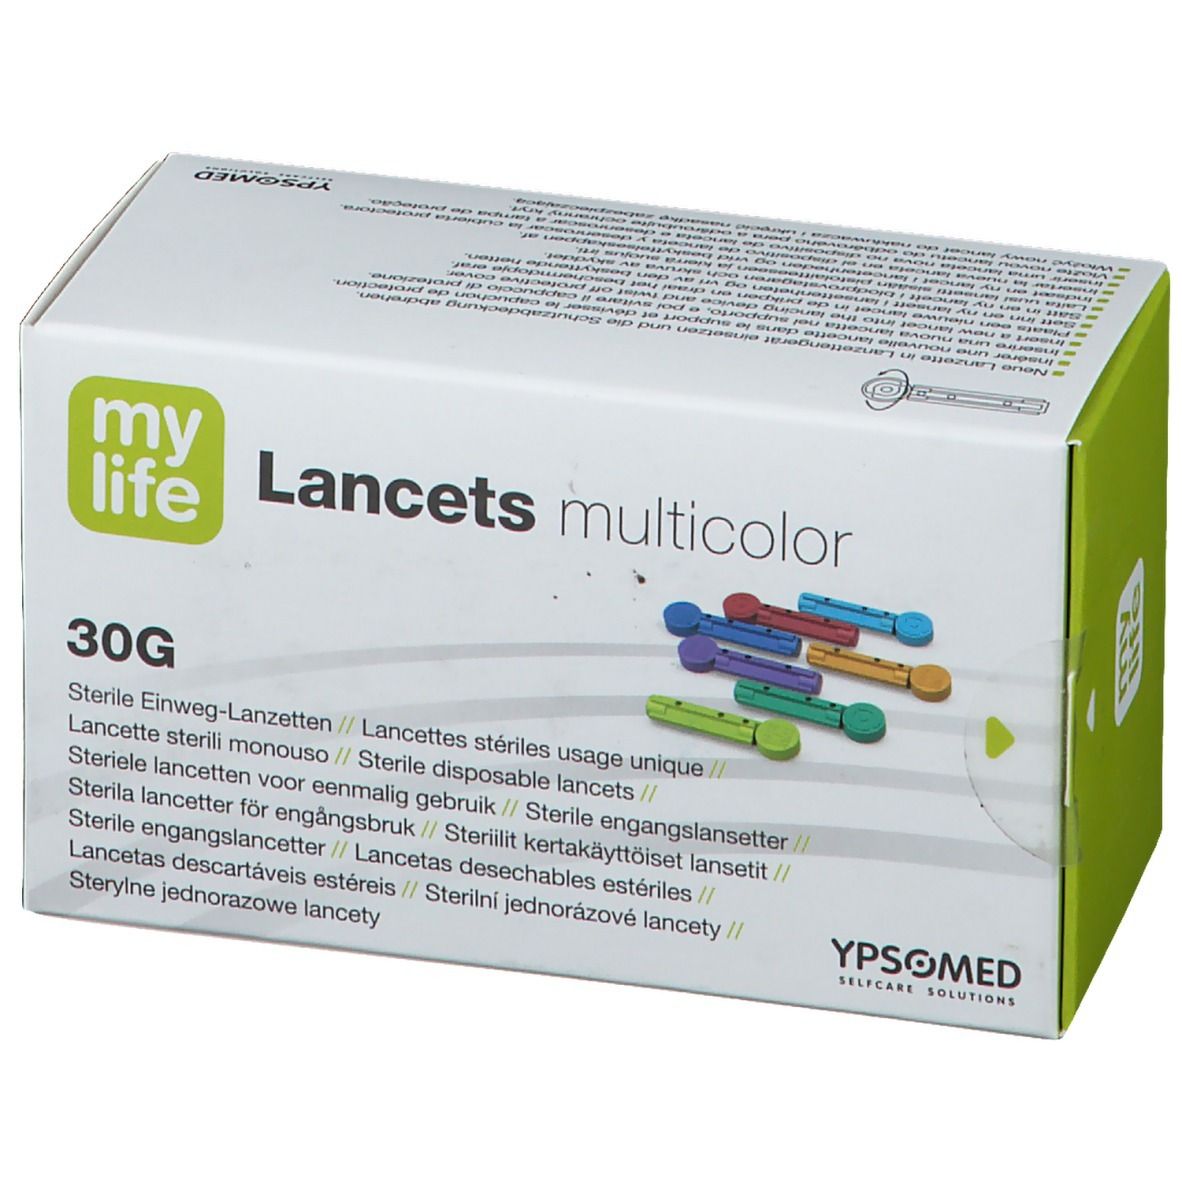 mylife Lancets multicolor